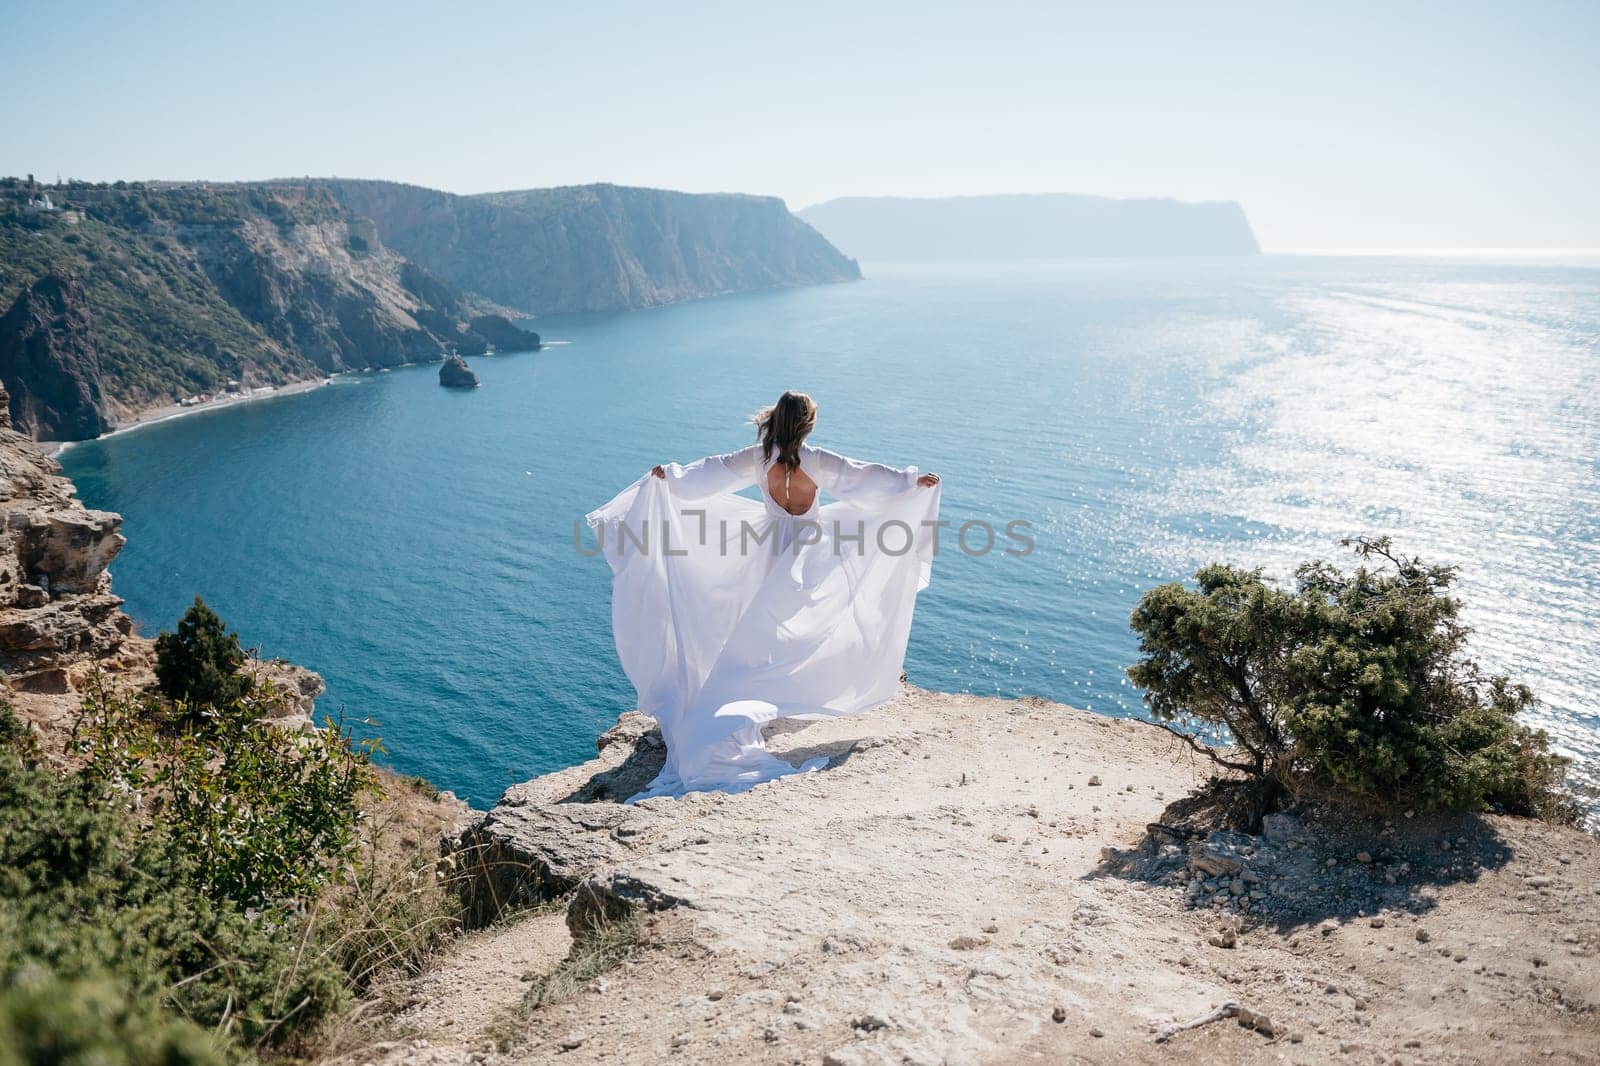 woman white dress stands on a rocky cliff overlooking the ocean. The scene is serene and peaceful, with the woman's dress billowing in the wind. The ocean in the background is calm and blue. by Matiunina